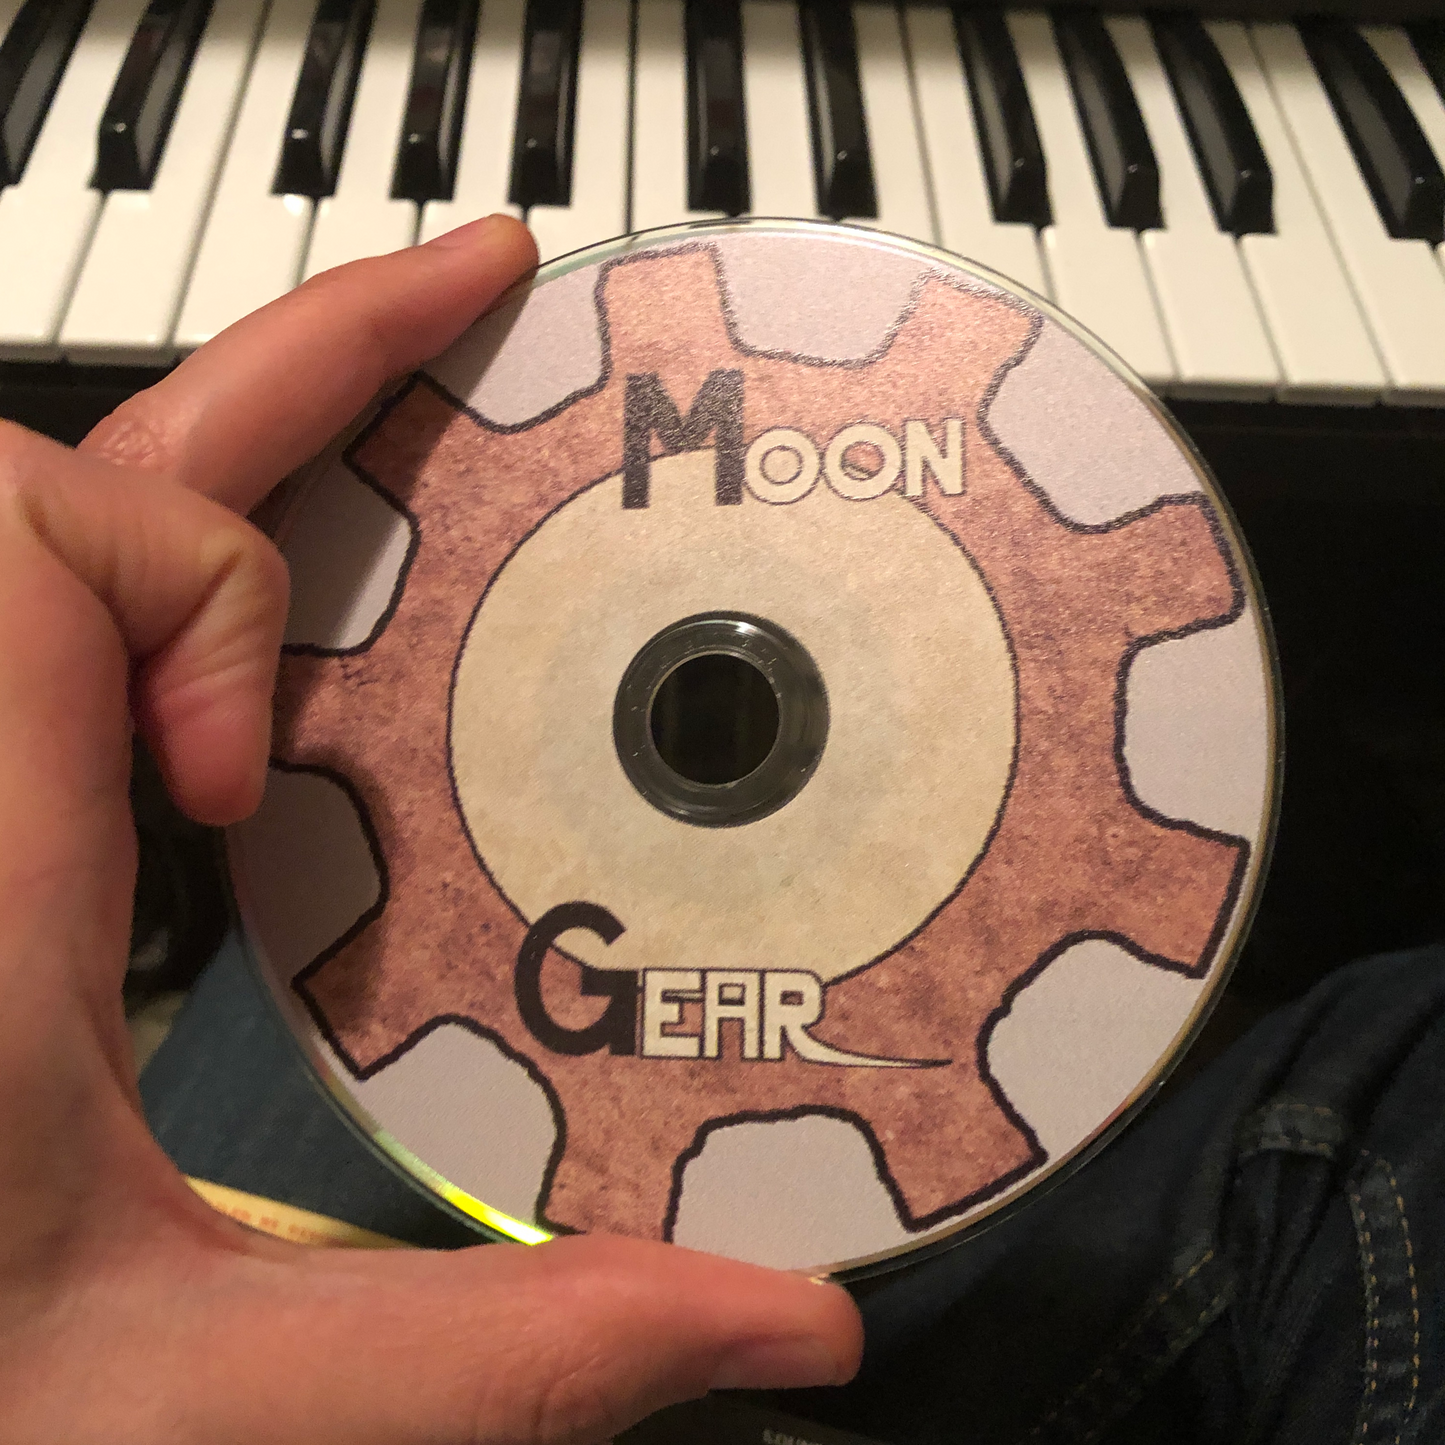 "Moon Gear" Deluxe CD (Only One Available)